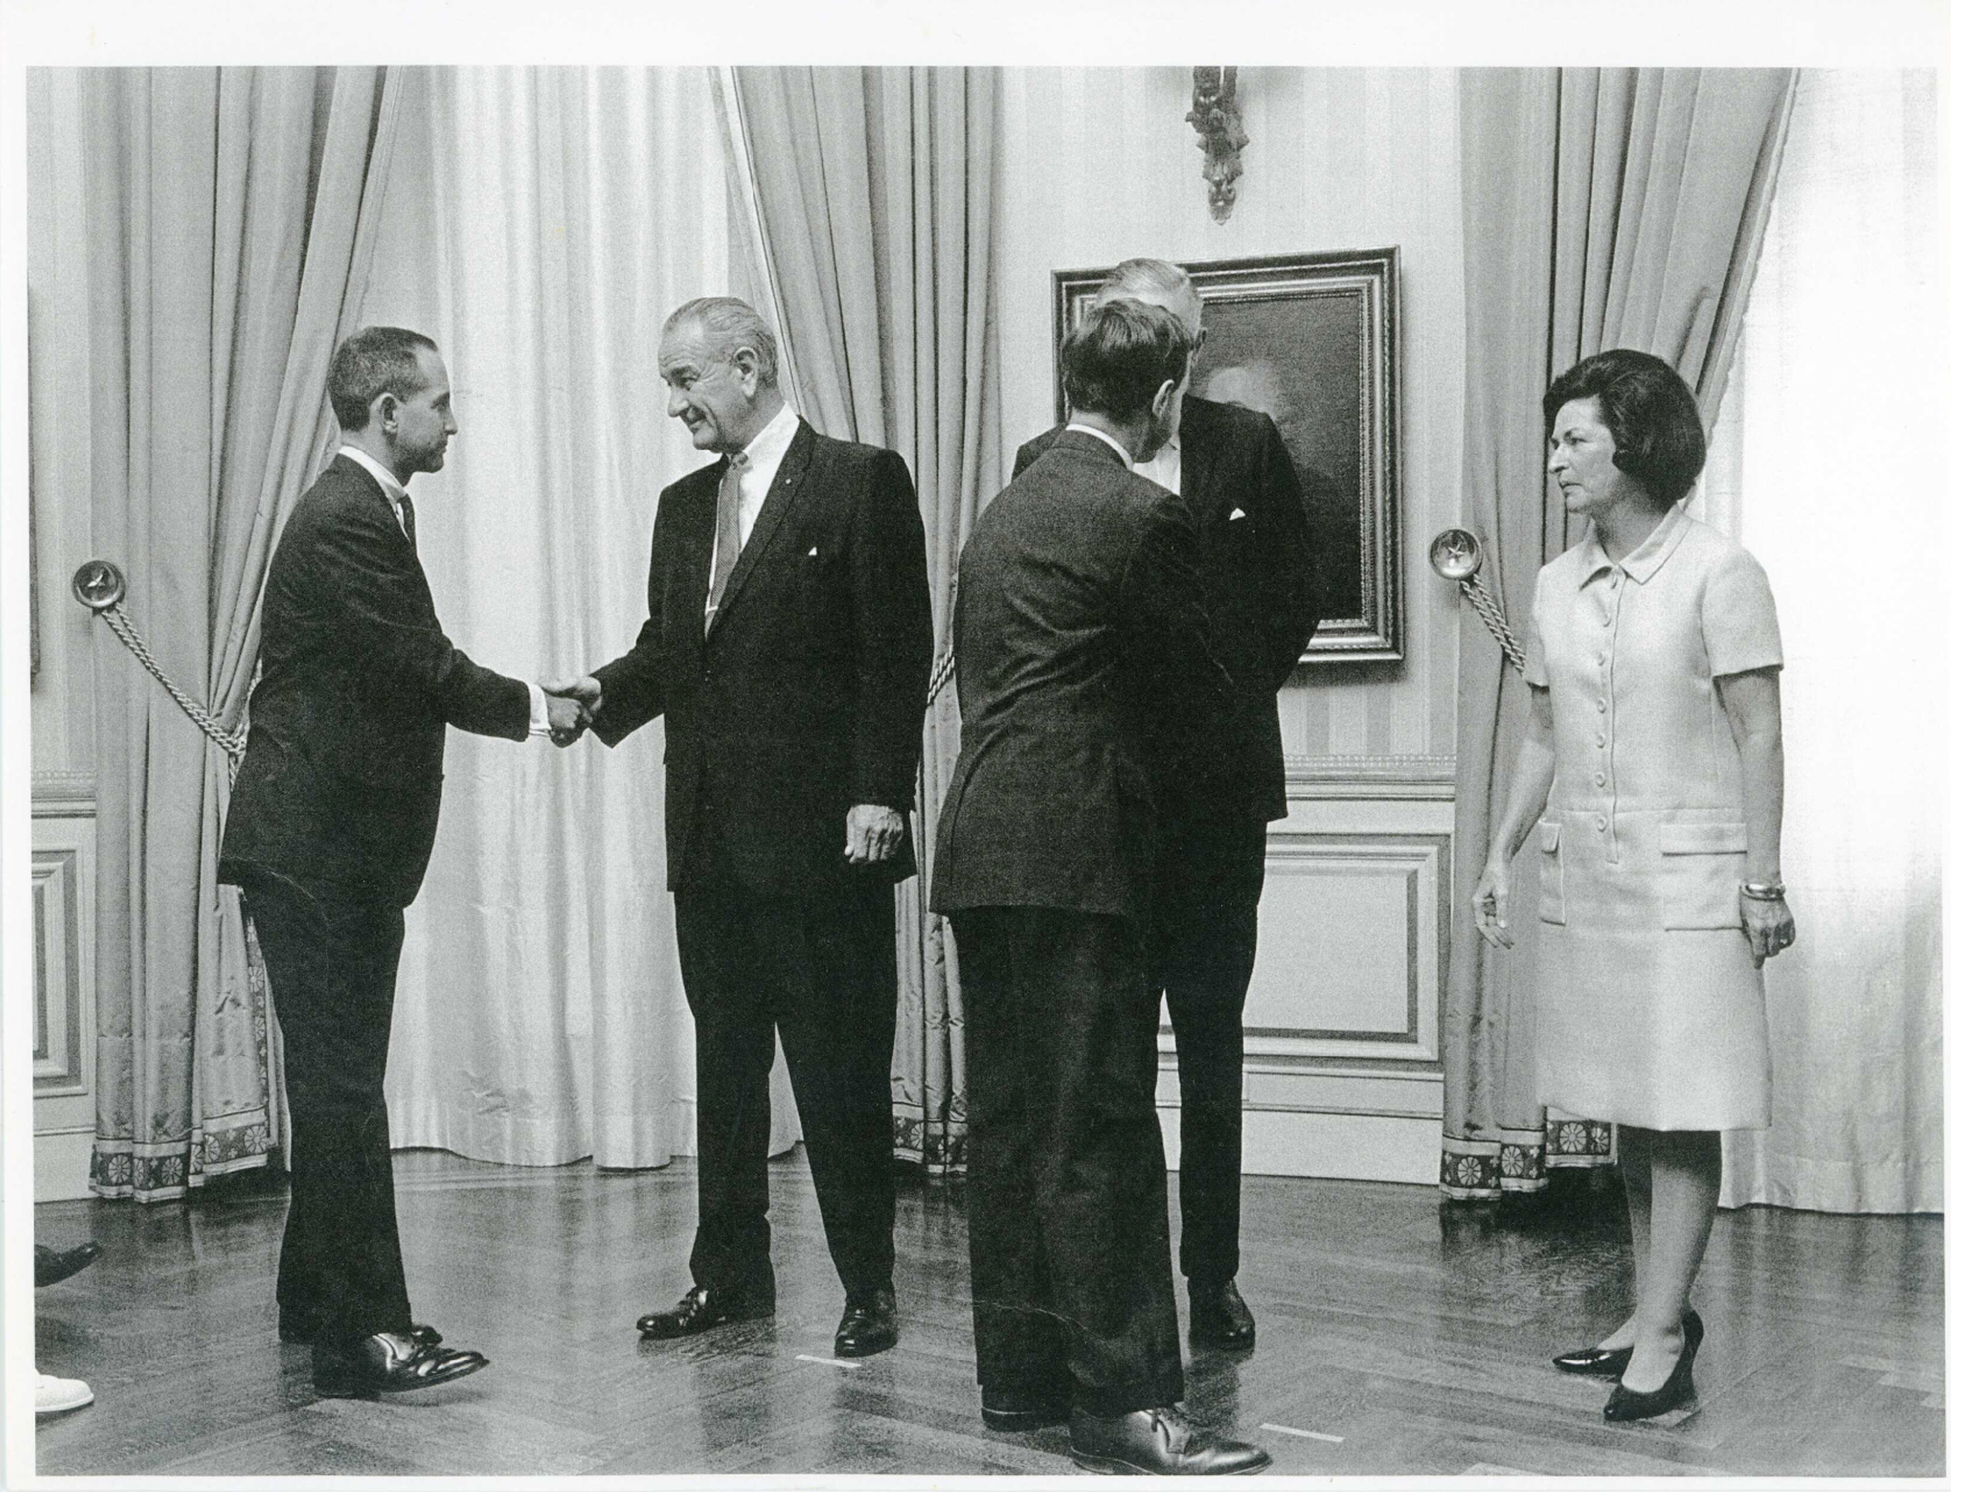 Ellsberg shaking hands with Lyndon Baines Johnson, ca. 1964.   

CourtesyDaniel Ellsberg Papers, Robert S. Cox Special Collections and University Archives Research Center, UMass Amherst Libraries